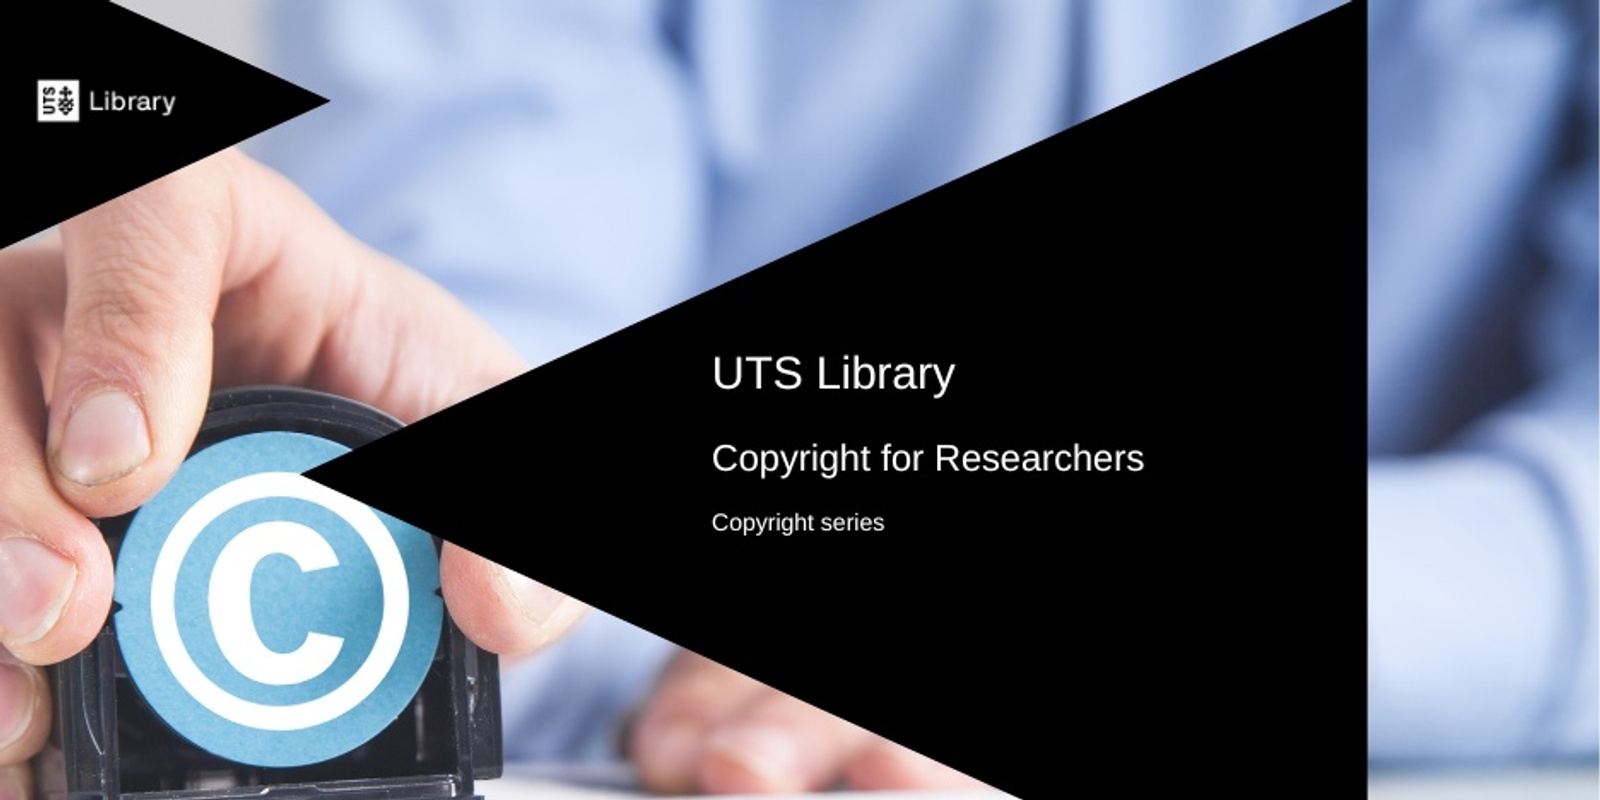 Copyright for Researchers